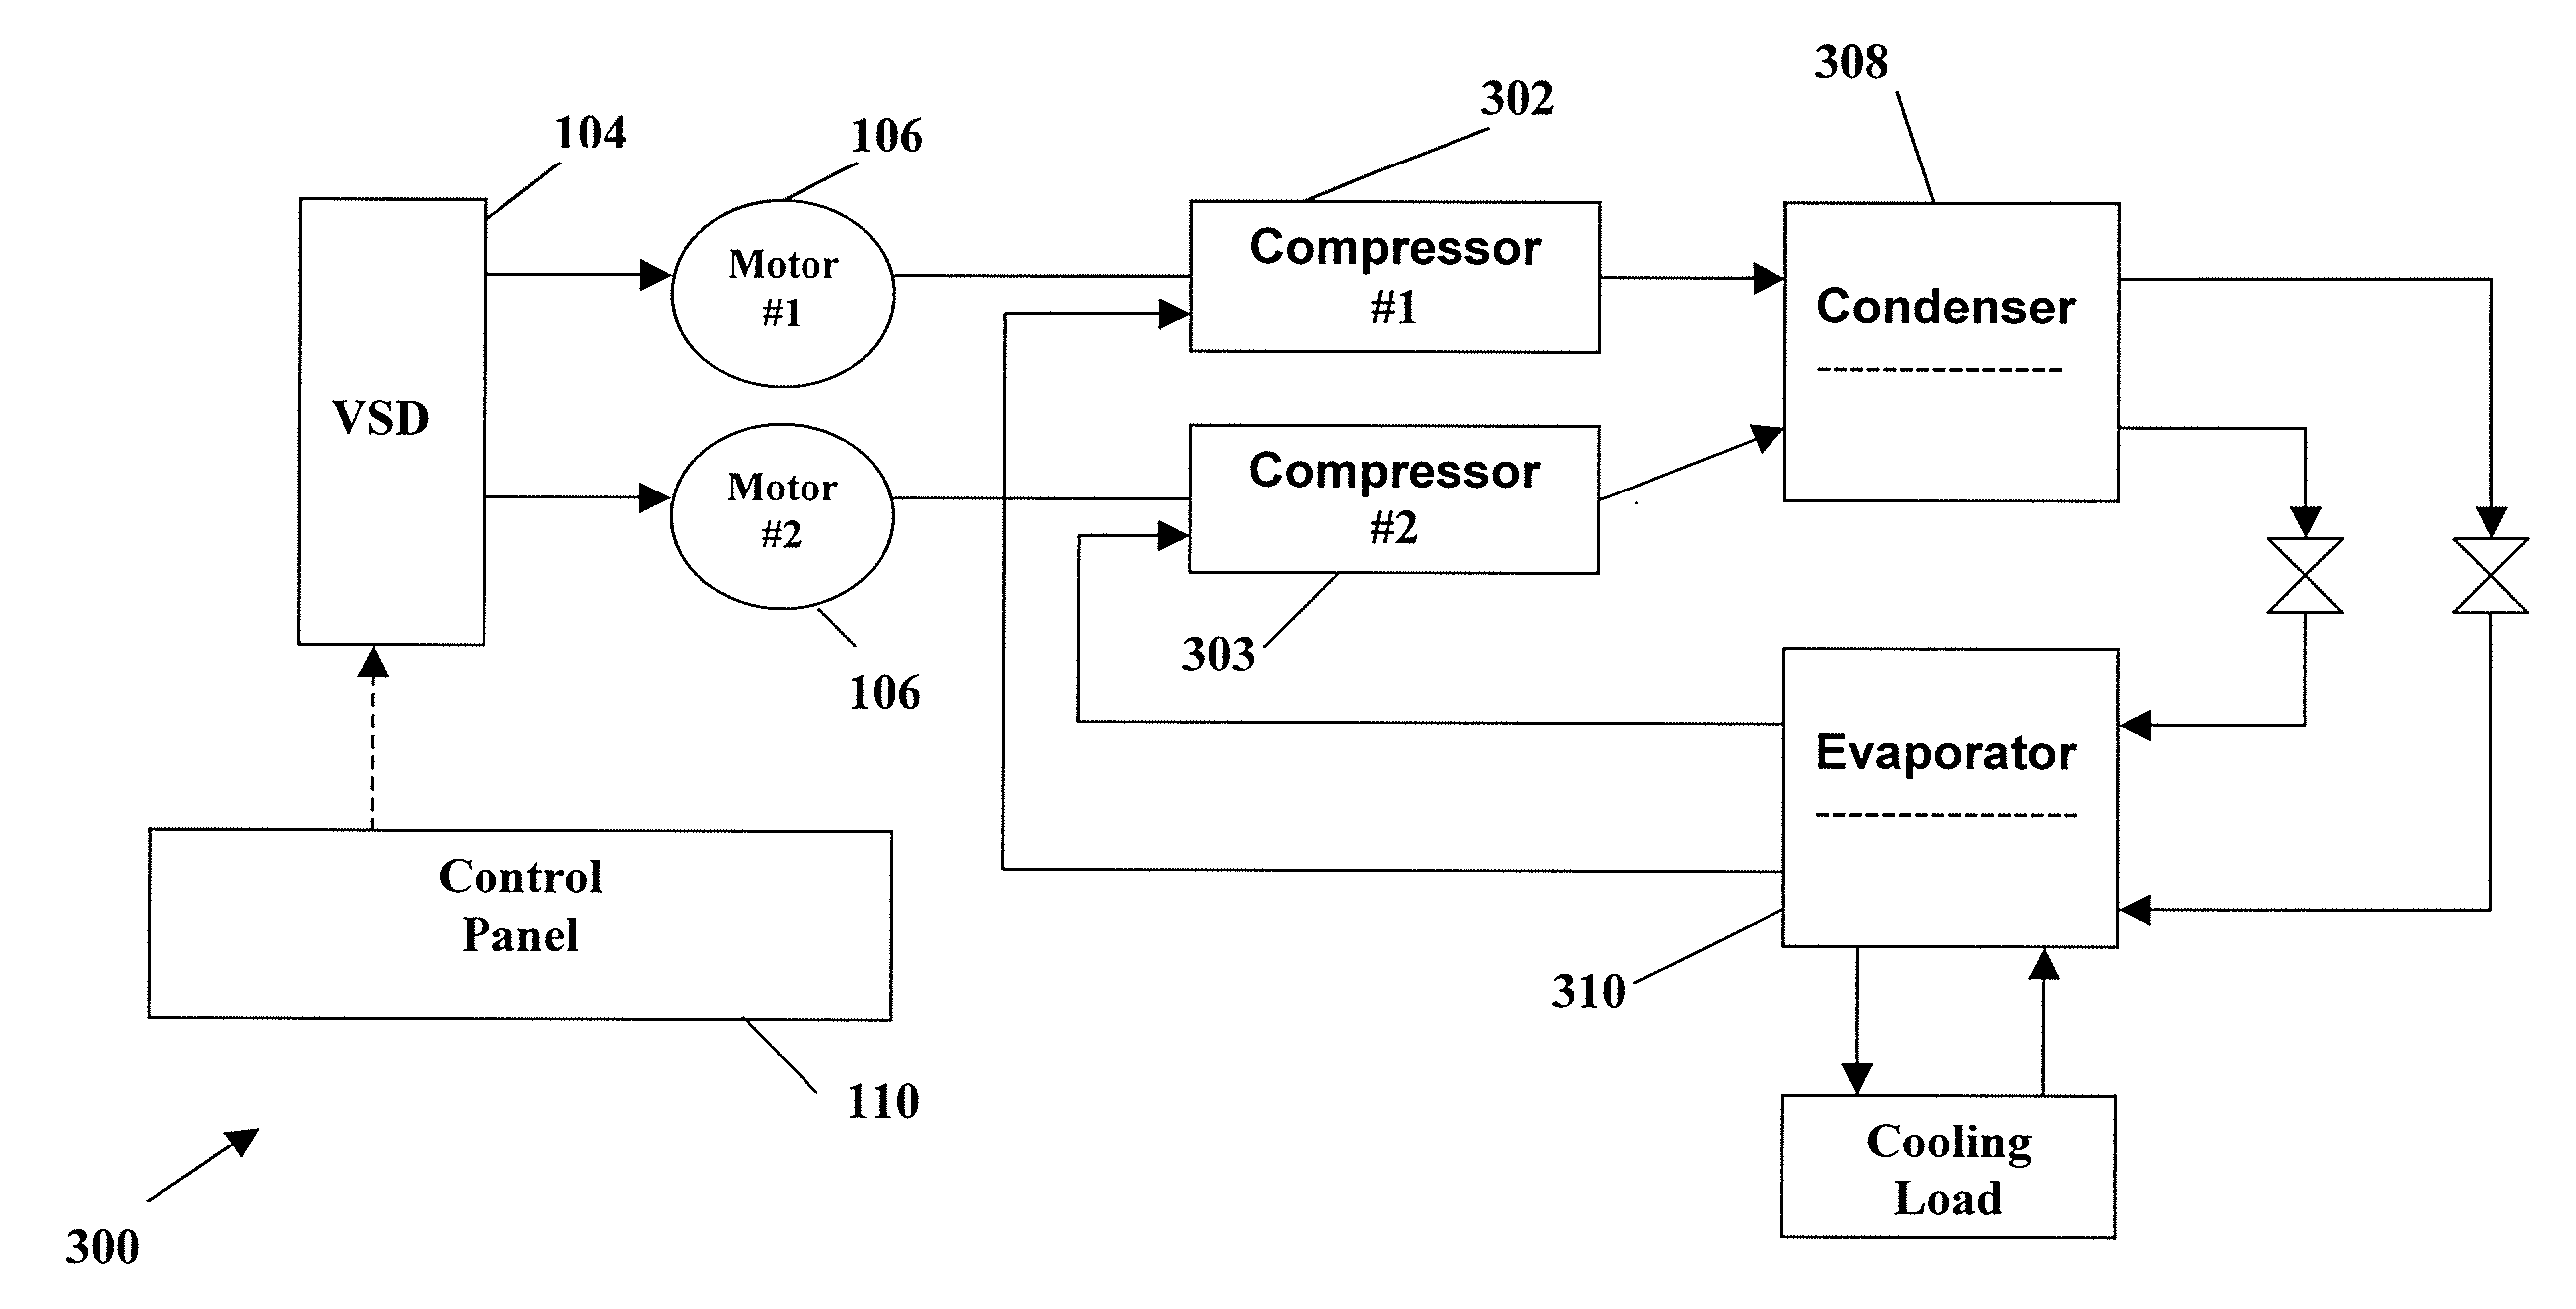 System and method for capacity control in a multiple compressor chiller system